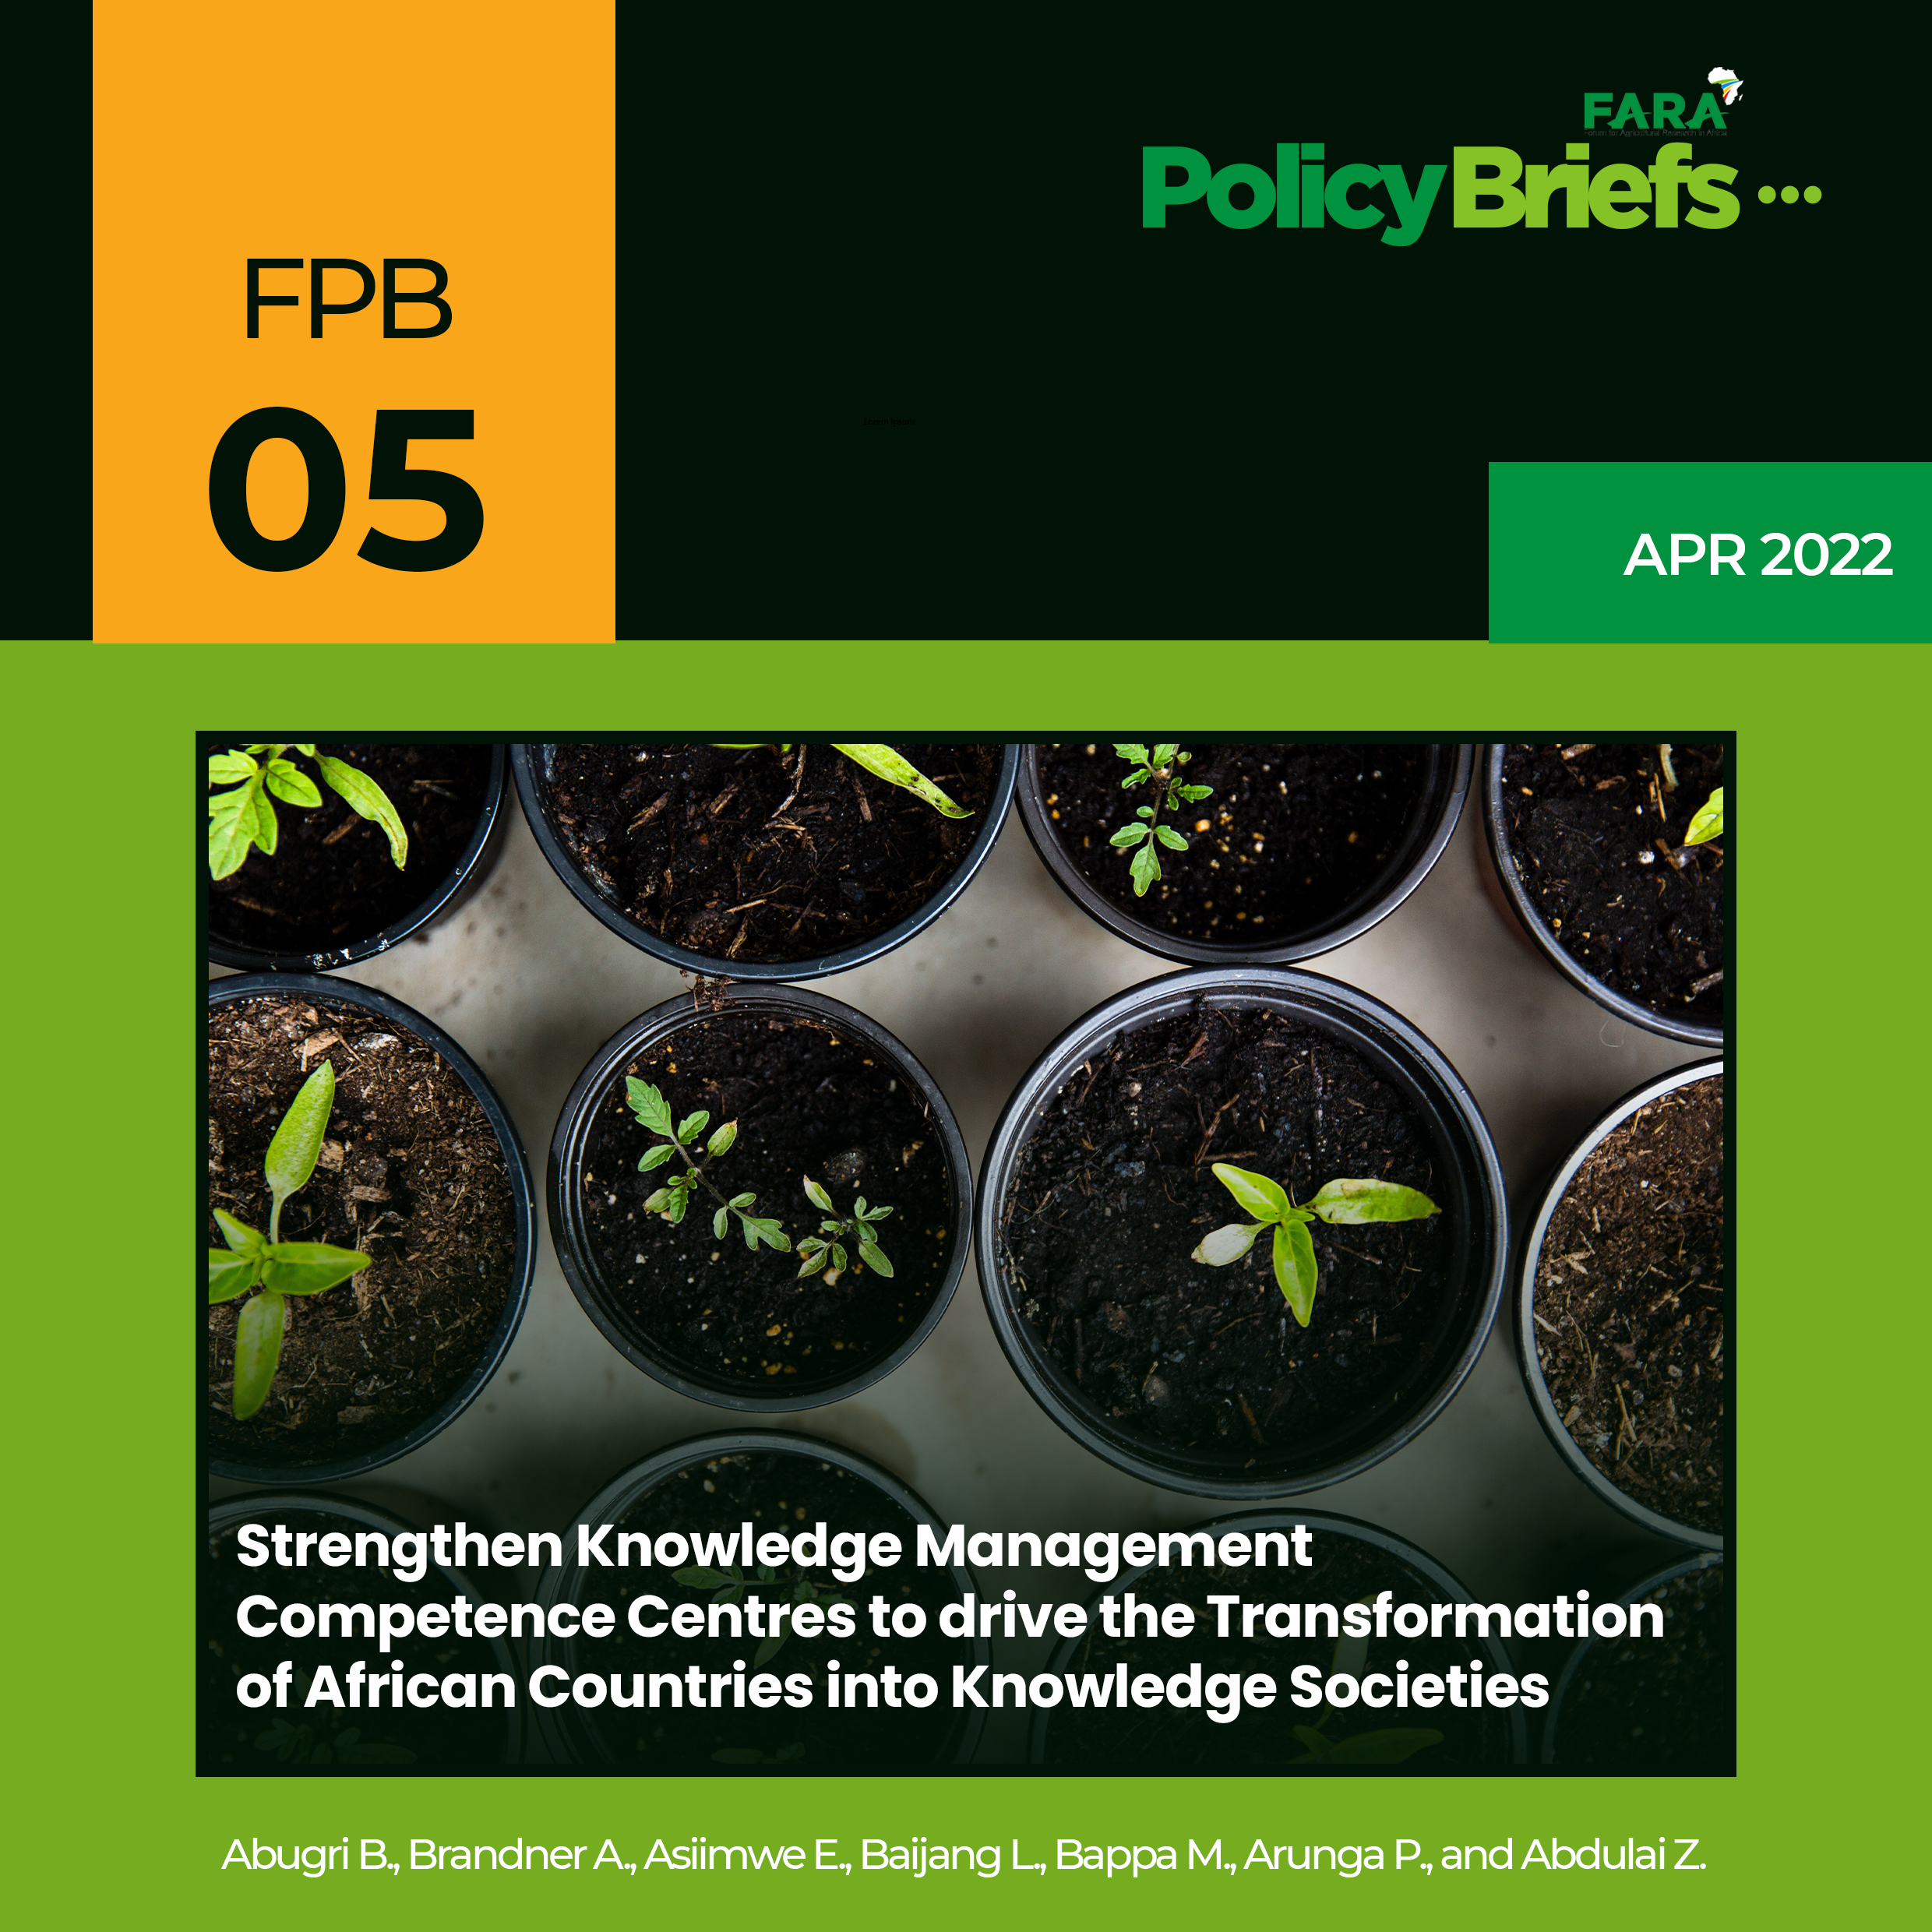 Strengthen Knowledge Management Competence Centres to drive the Transformation of African Countries into Knowledge Societies